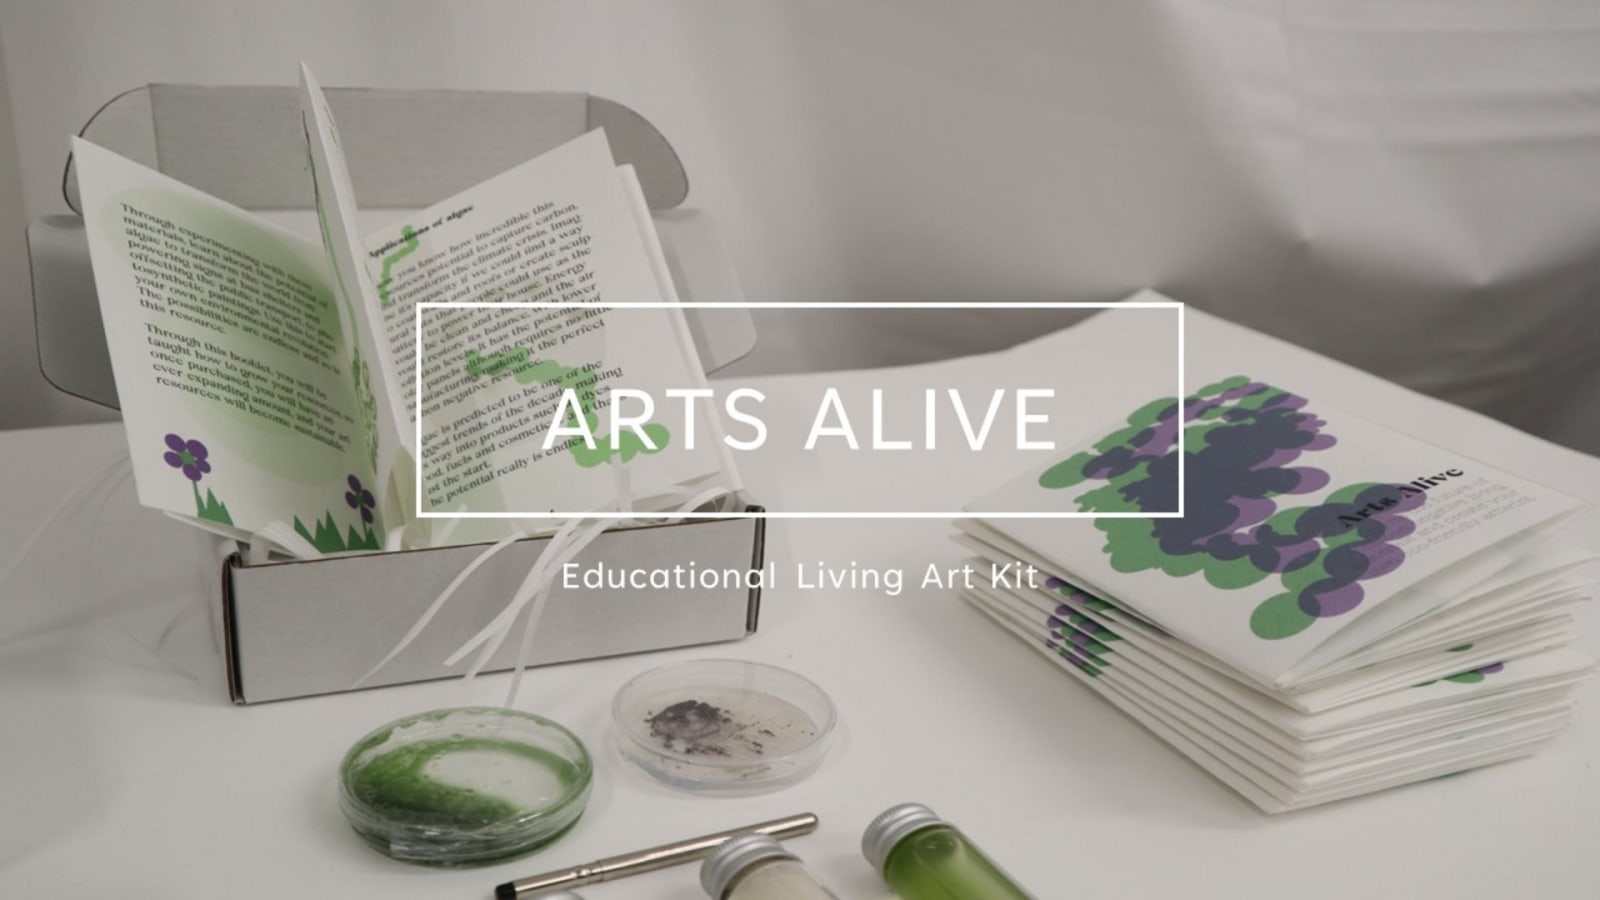 An algae art kit, with two  petri dishes, one green and one dark purple, next to a box with a educational booklet.